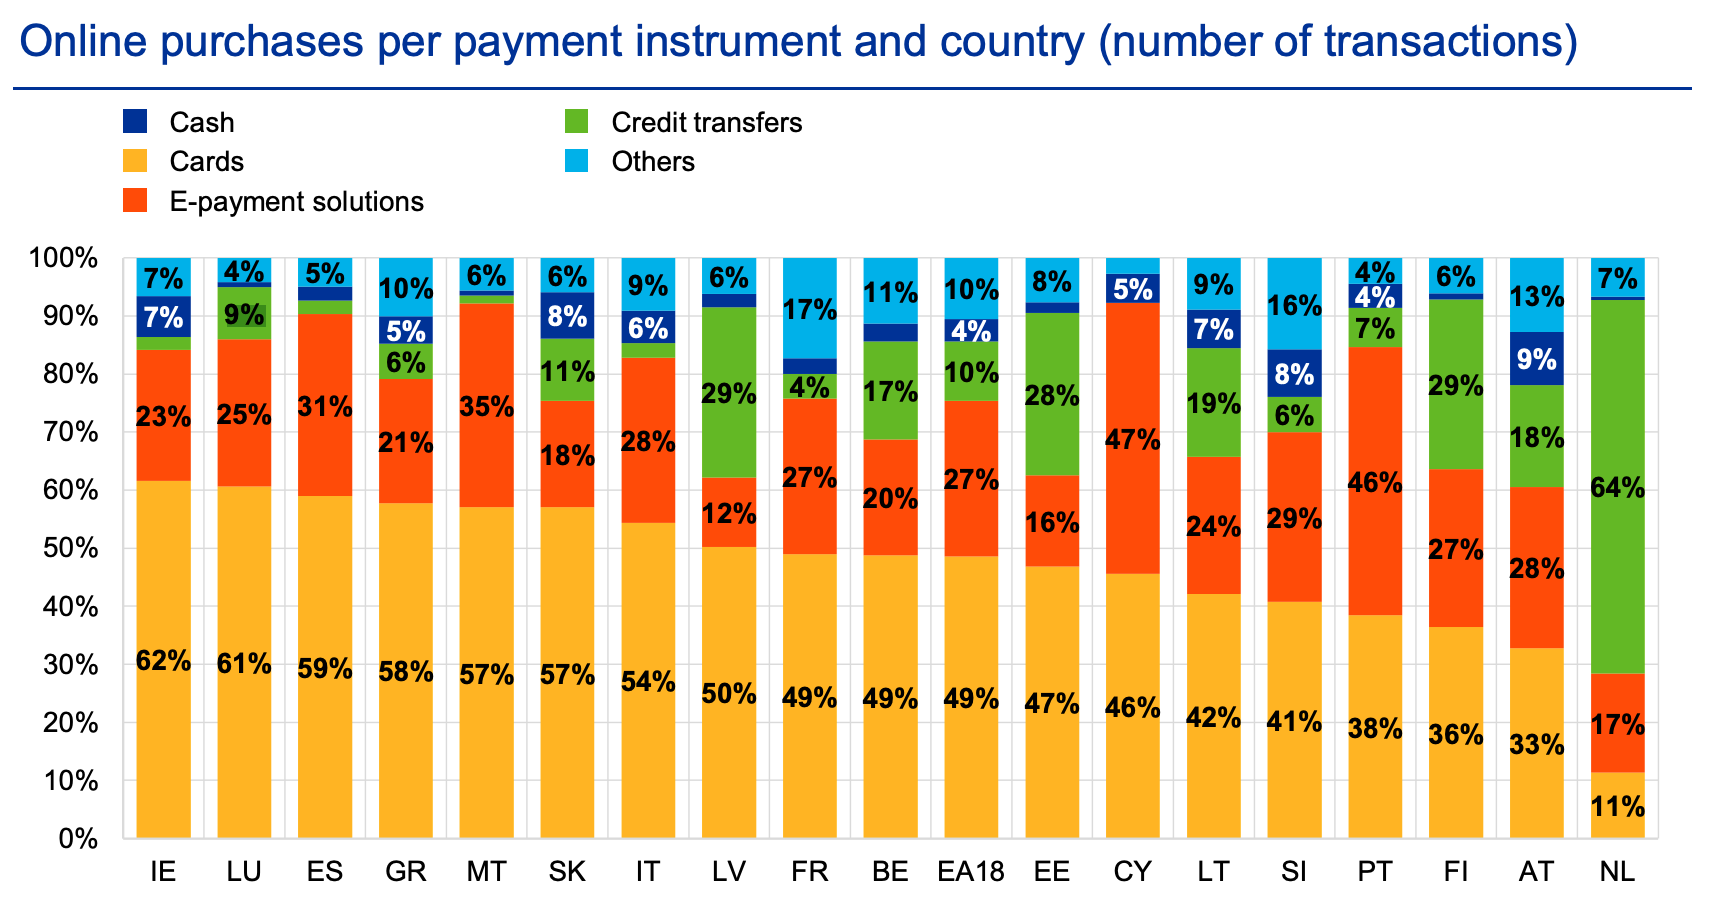 Online purchases per payment instrument and country